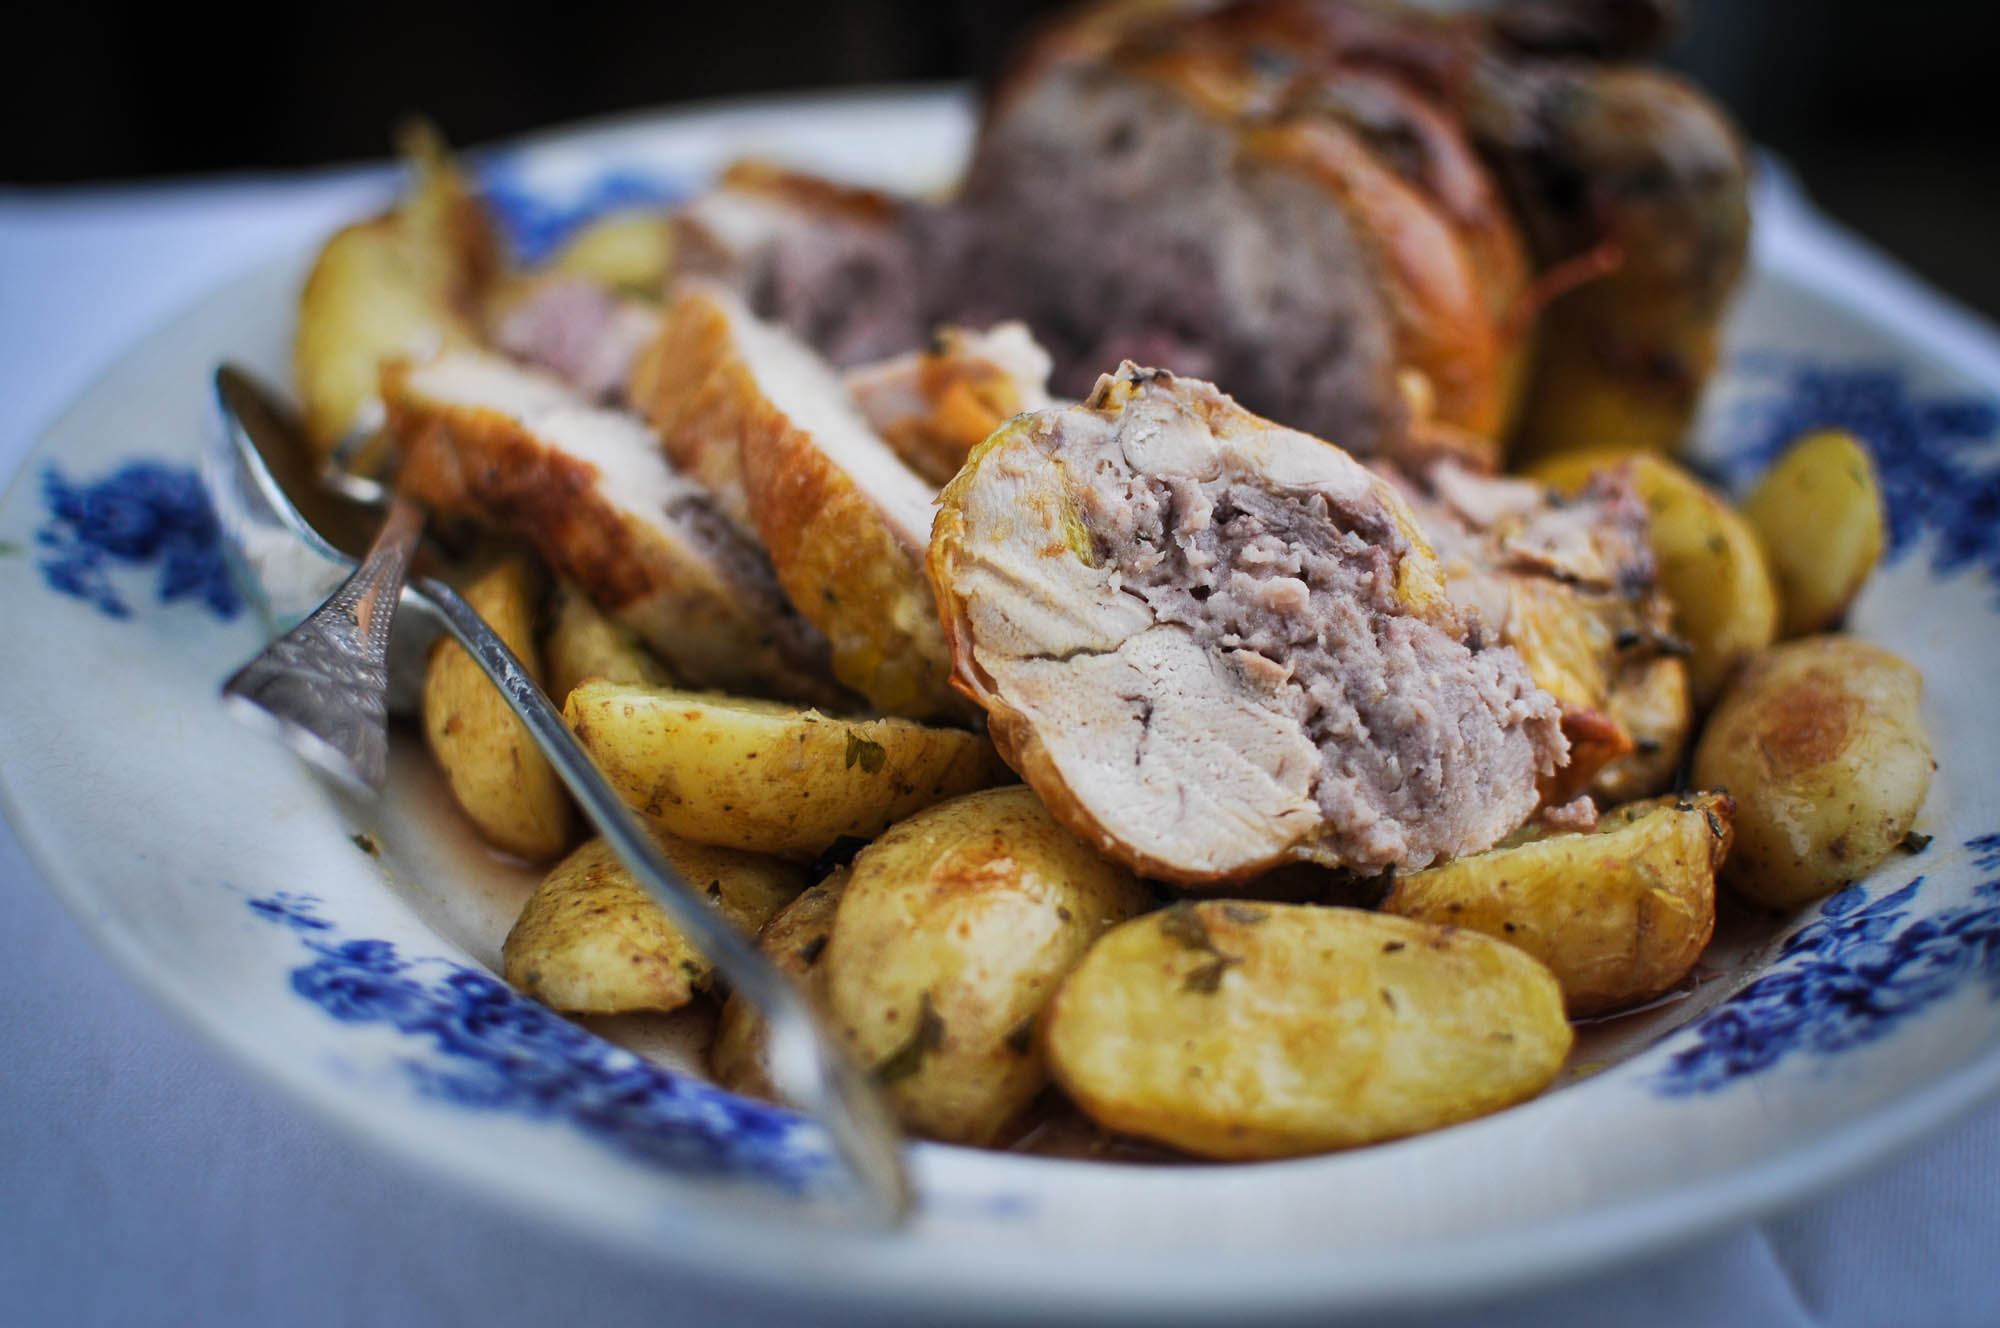 Review: Two-Bird Roast from The Wild Meat Company